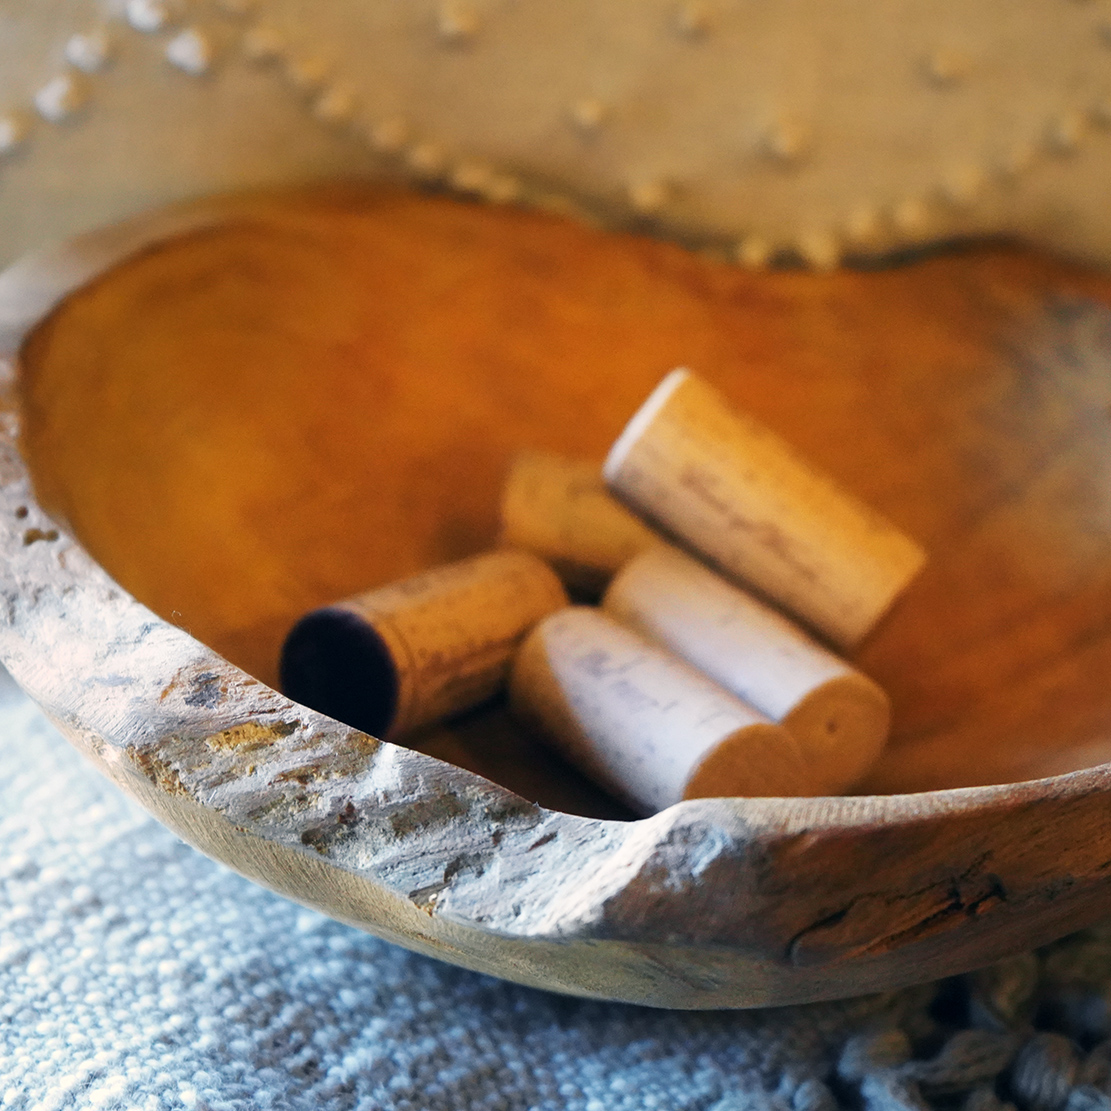 A decorative bowl for keys, corks, and any other little things it's good to have around. Shop our boutique!